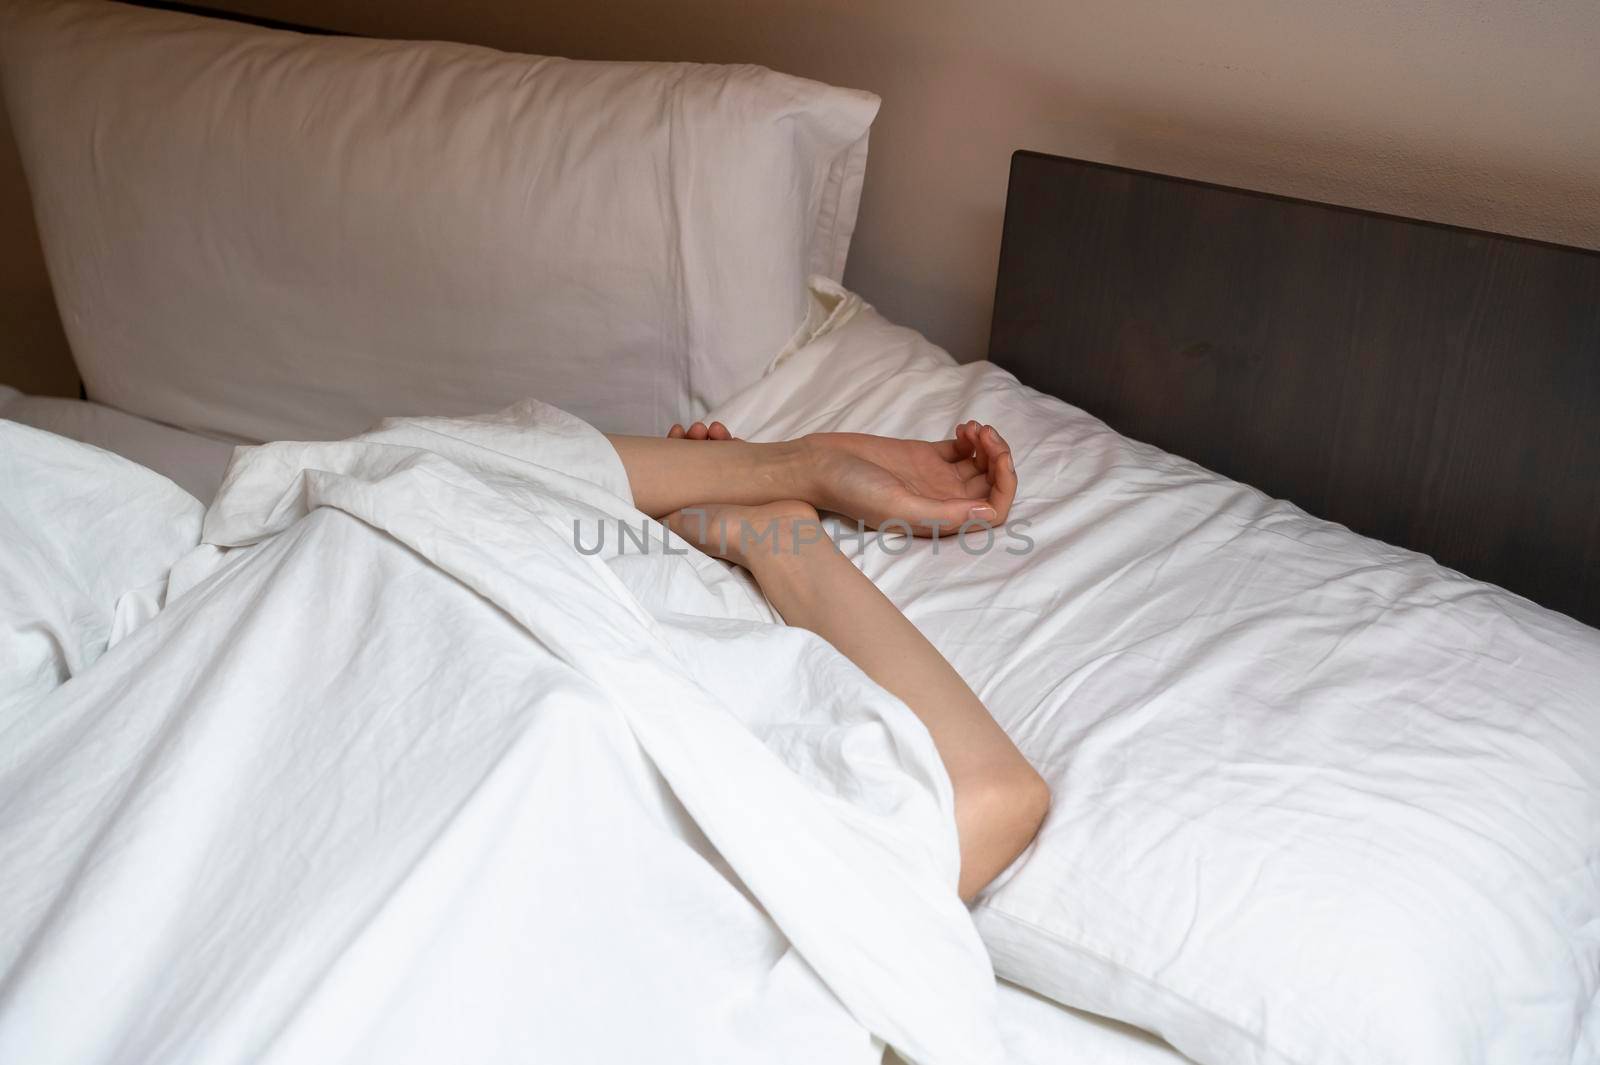 Woman sleeping in the bed under white sheet.